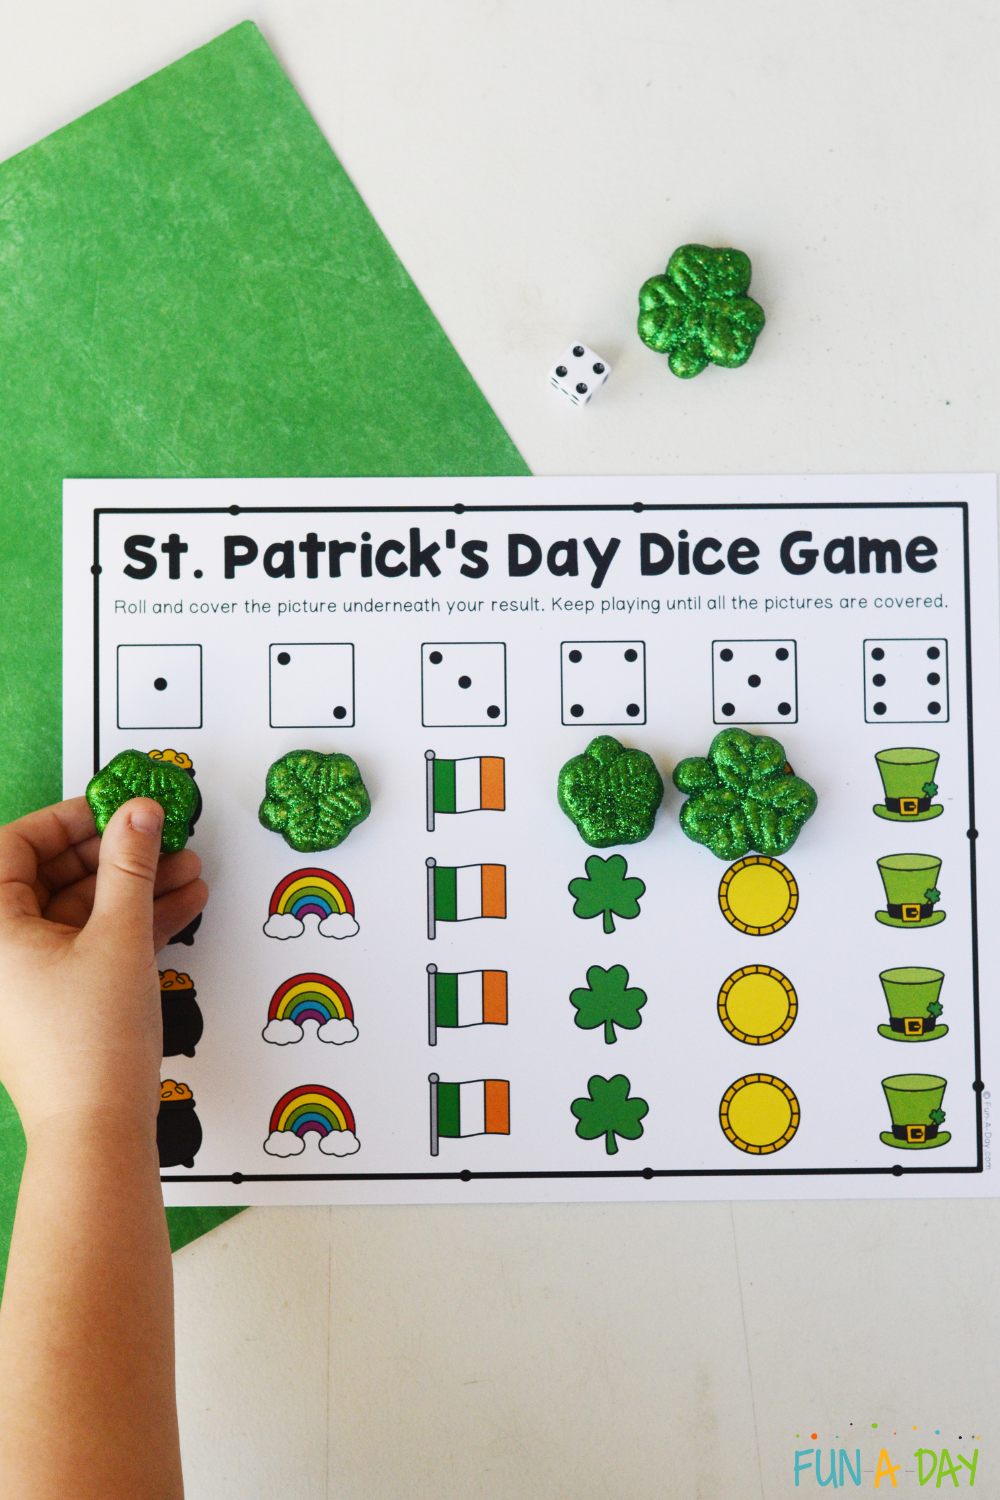 child placing a shamrock manipulative on st. patrick's day dice game printable, under the picture of a die